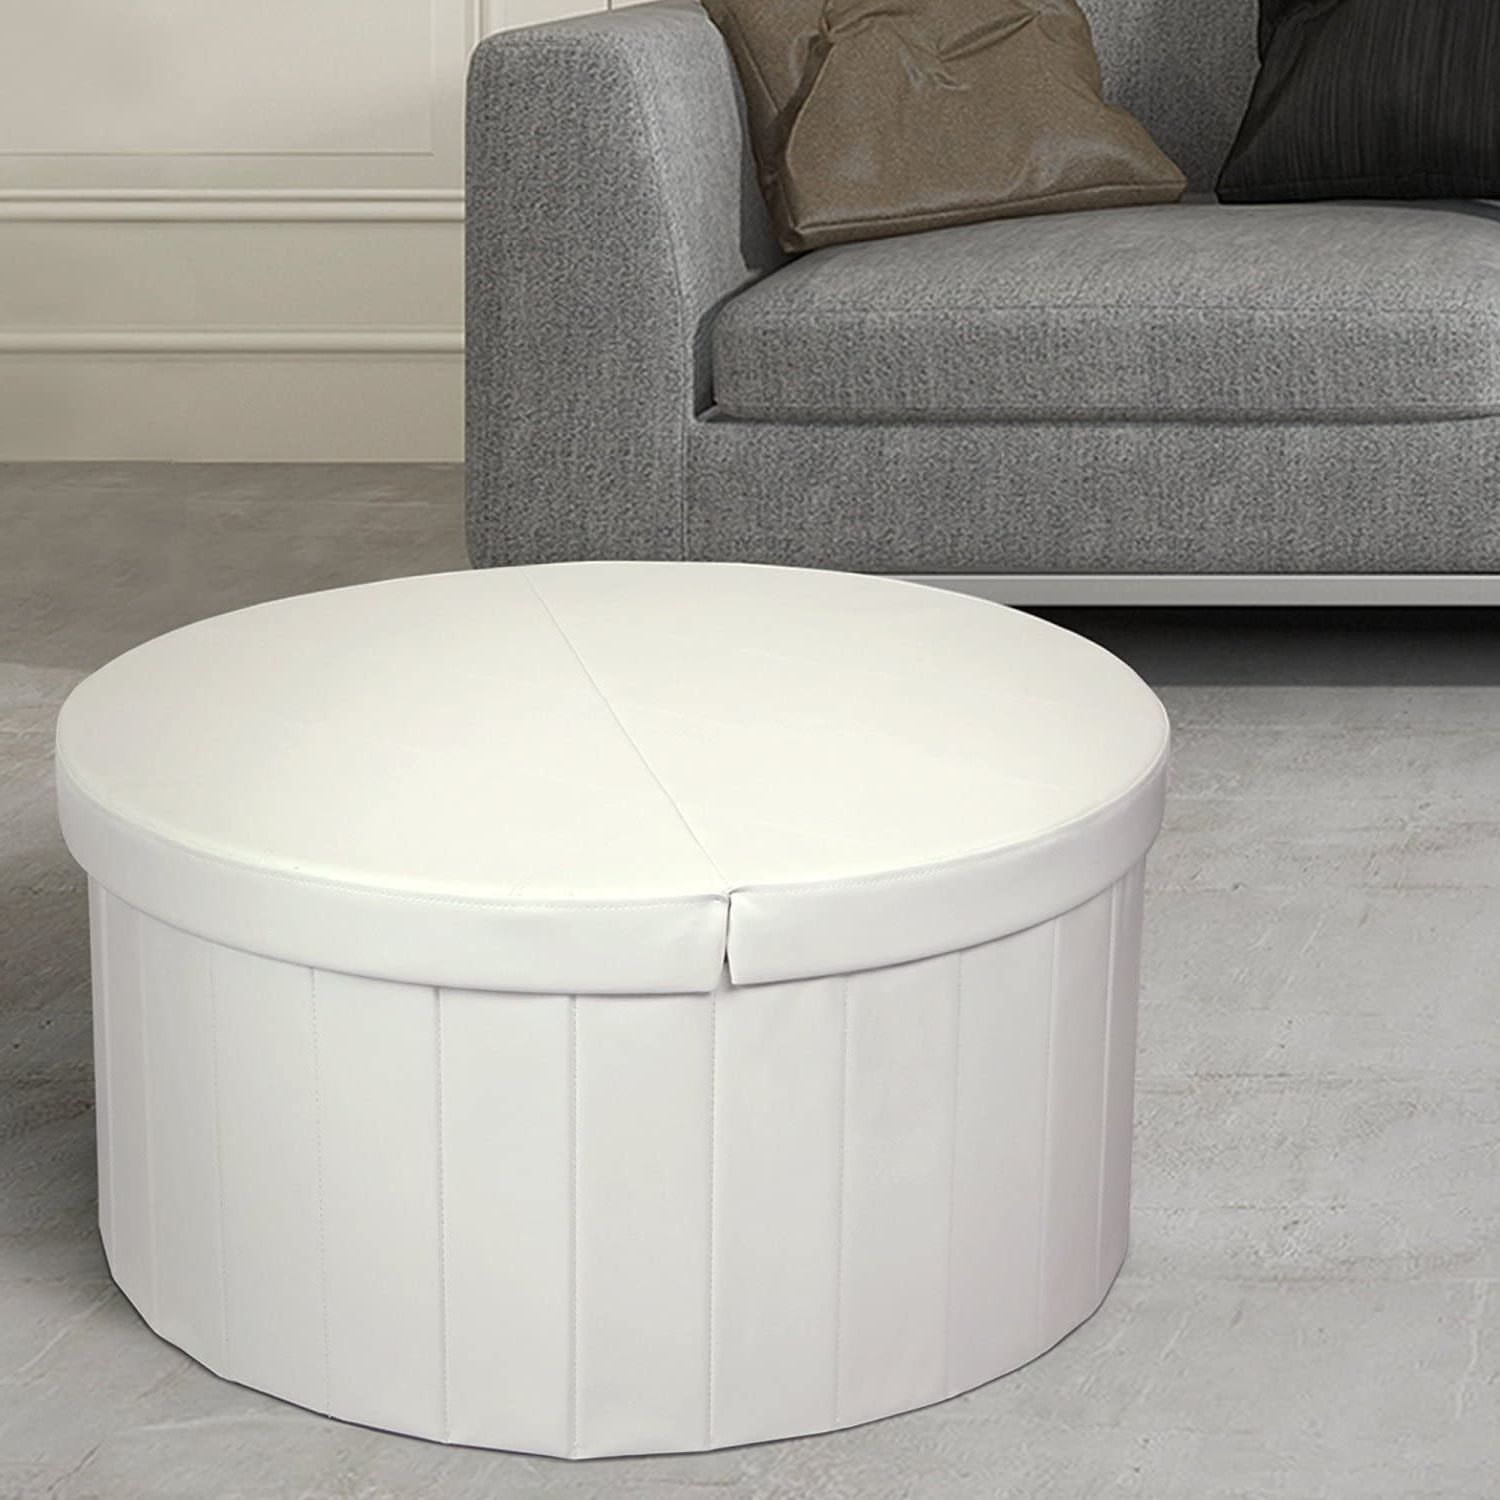 Black And Ivory Solid Cube Pouf Ottomans With Preferred Best Round White Leather Ottoman Tufted – Your House (View 8 of 10)